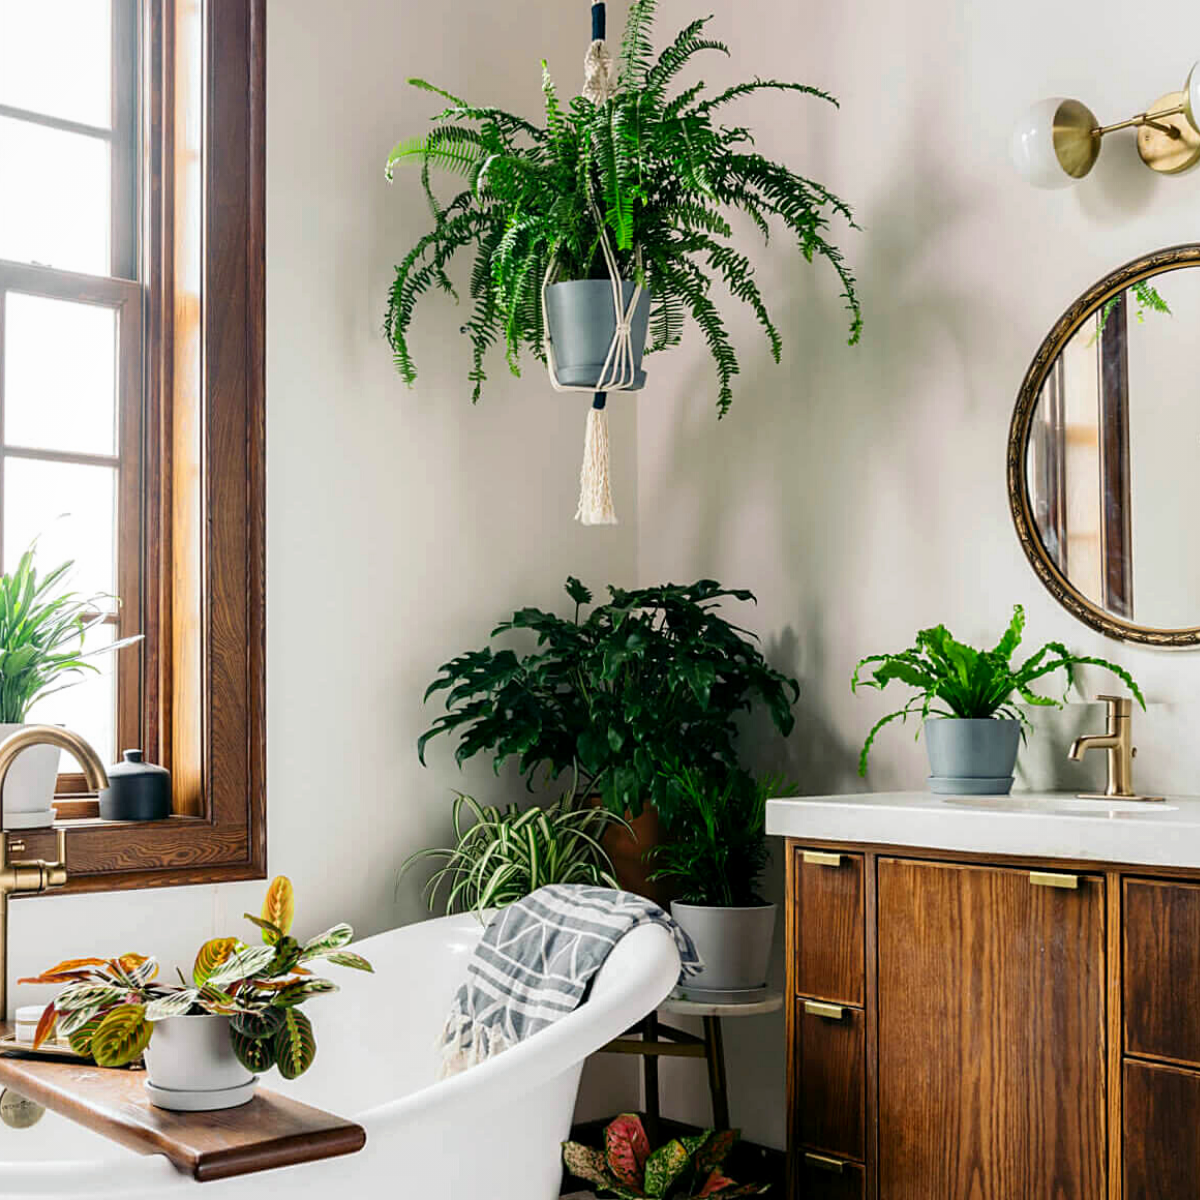 Here are 7 of the Best Bathroom Plants- Article on Thursd